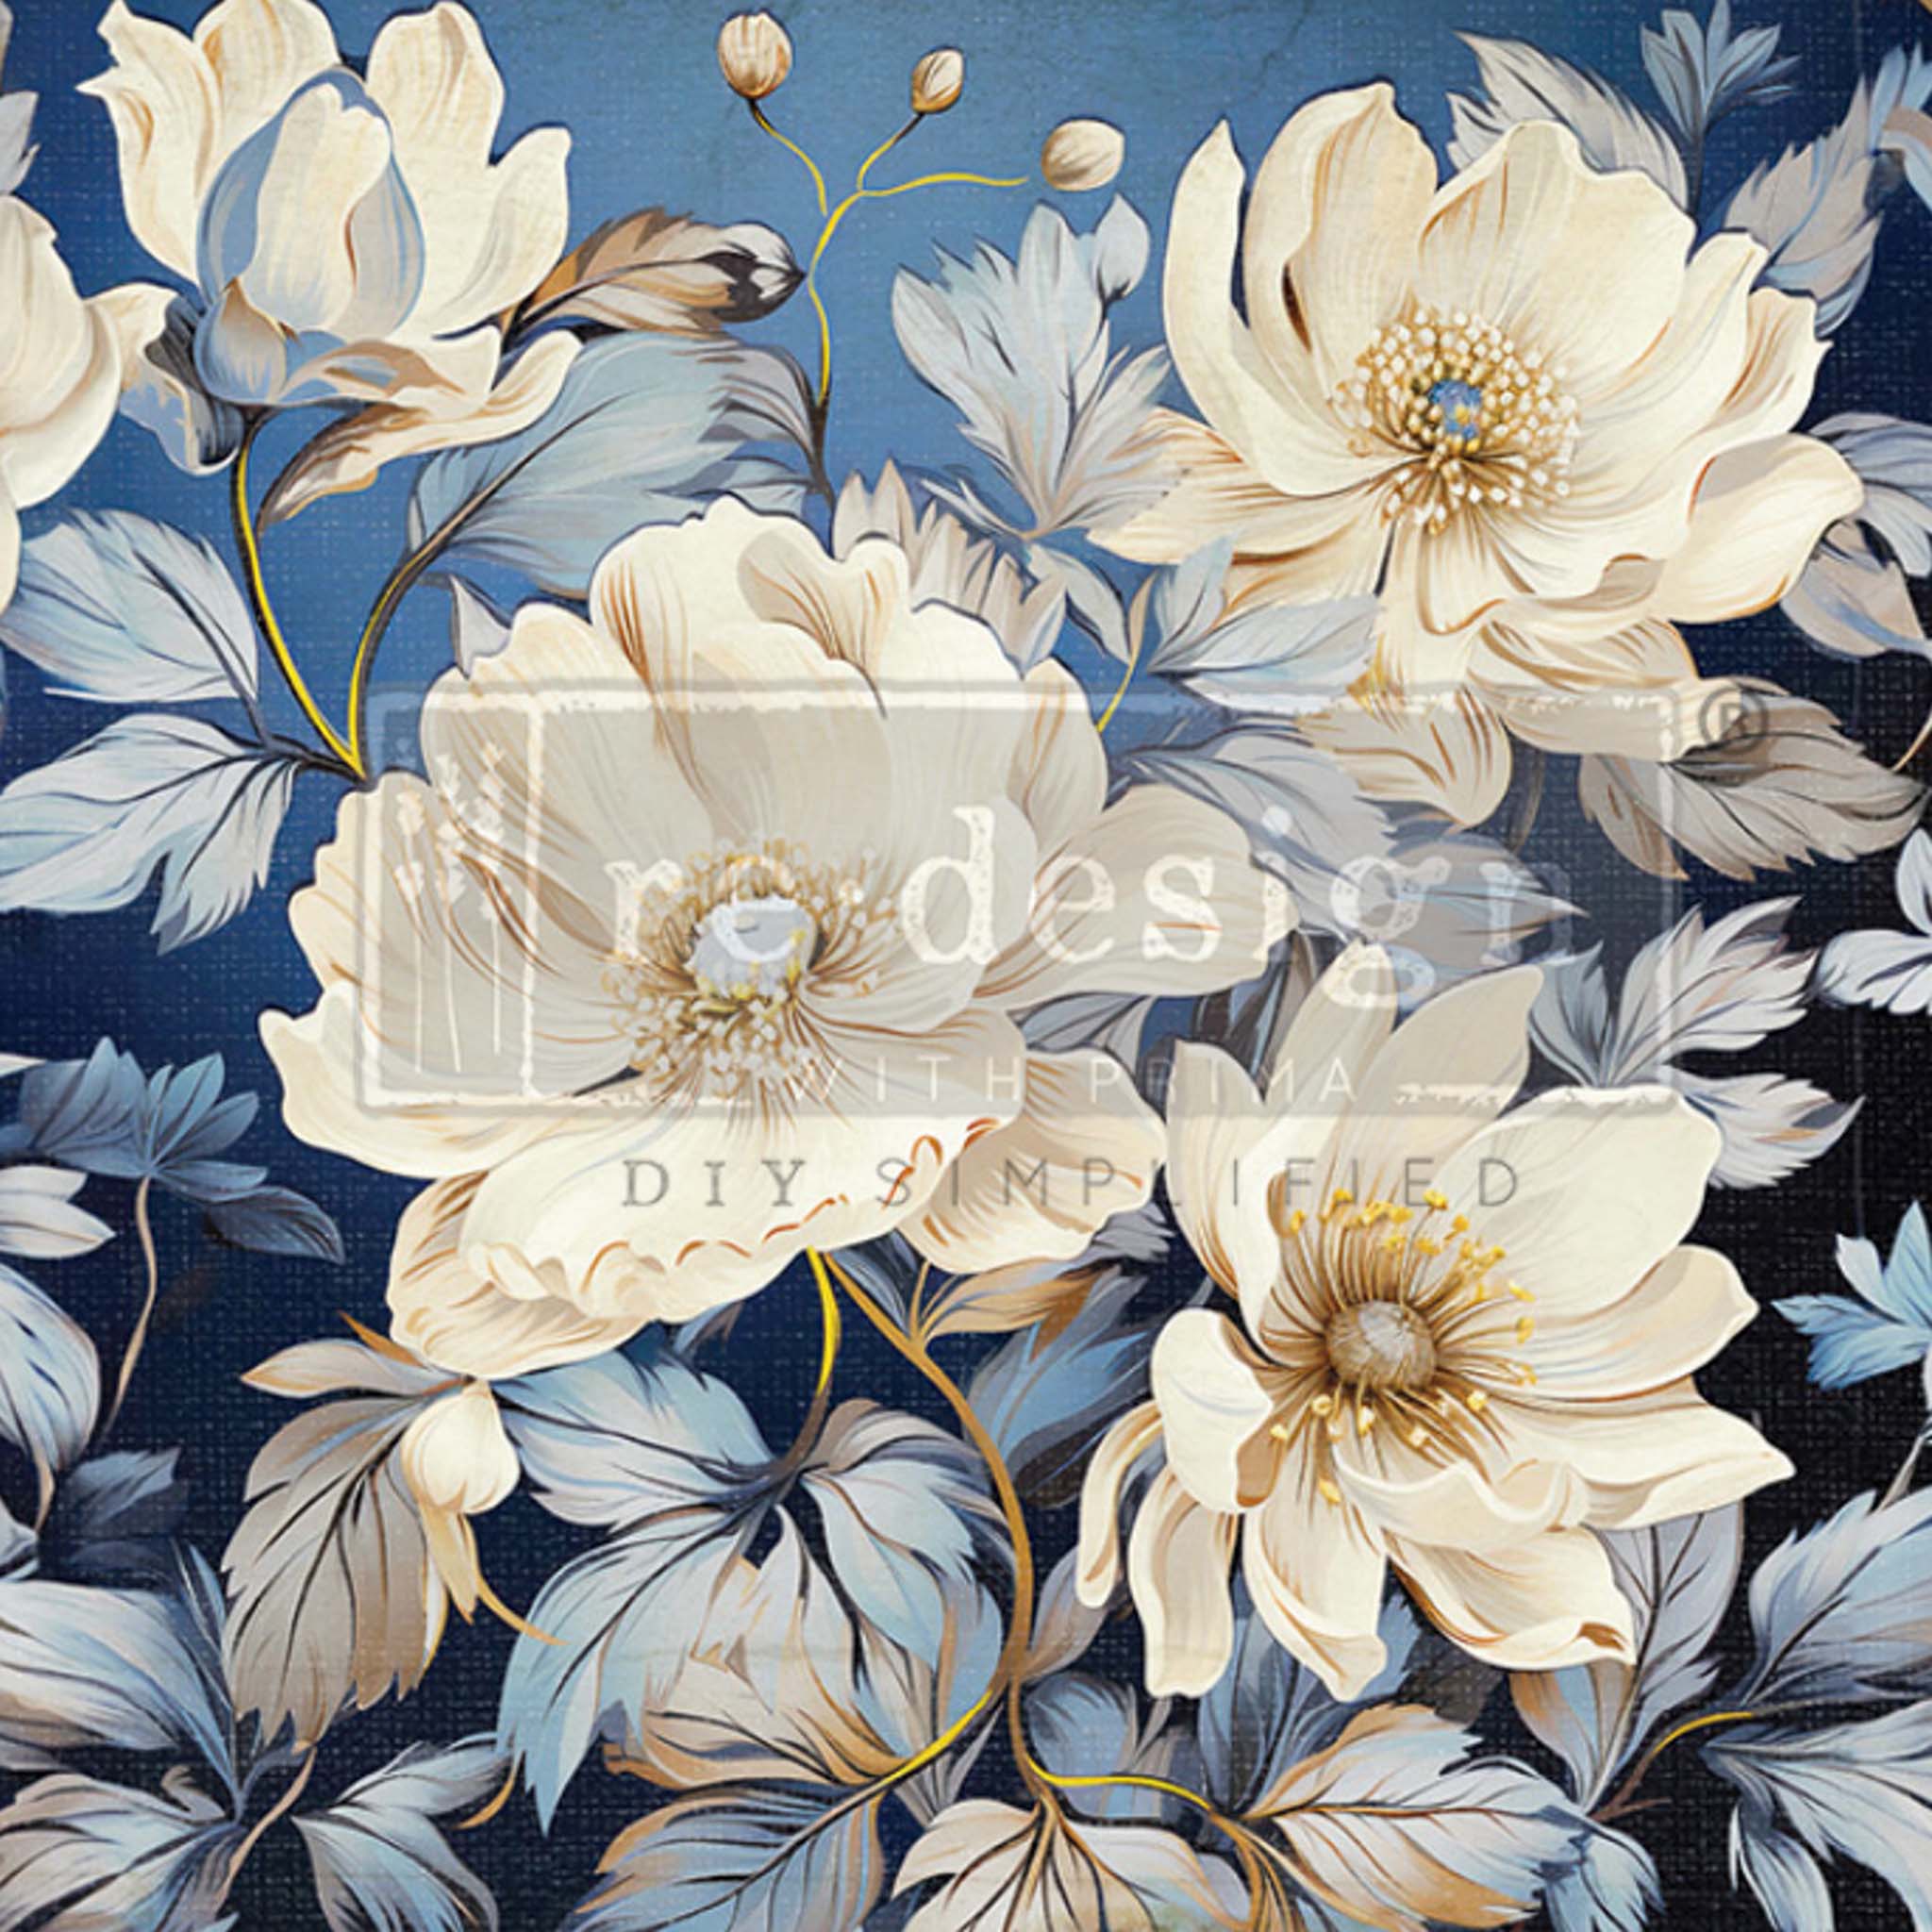 Close-up of a tissue paper design that features large white flower blooms with light blue foliage against a navy blue background.